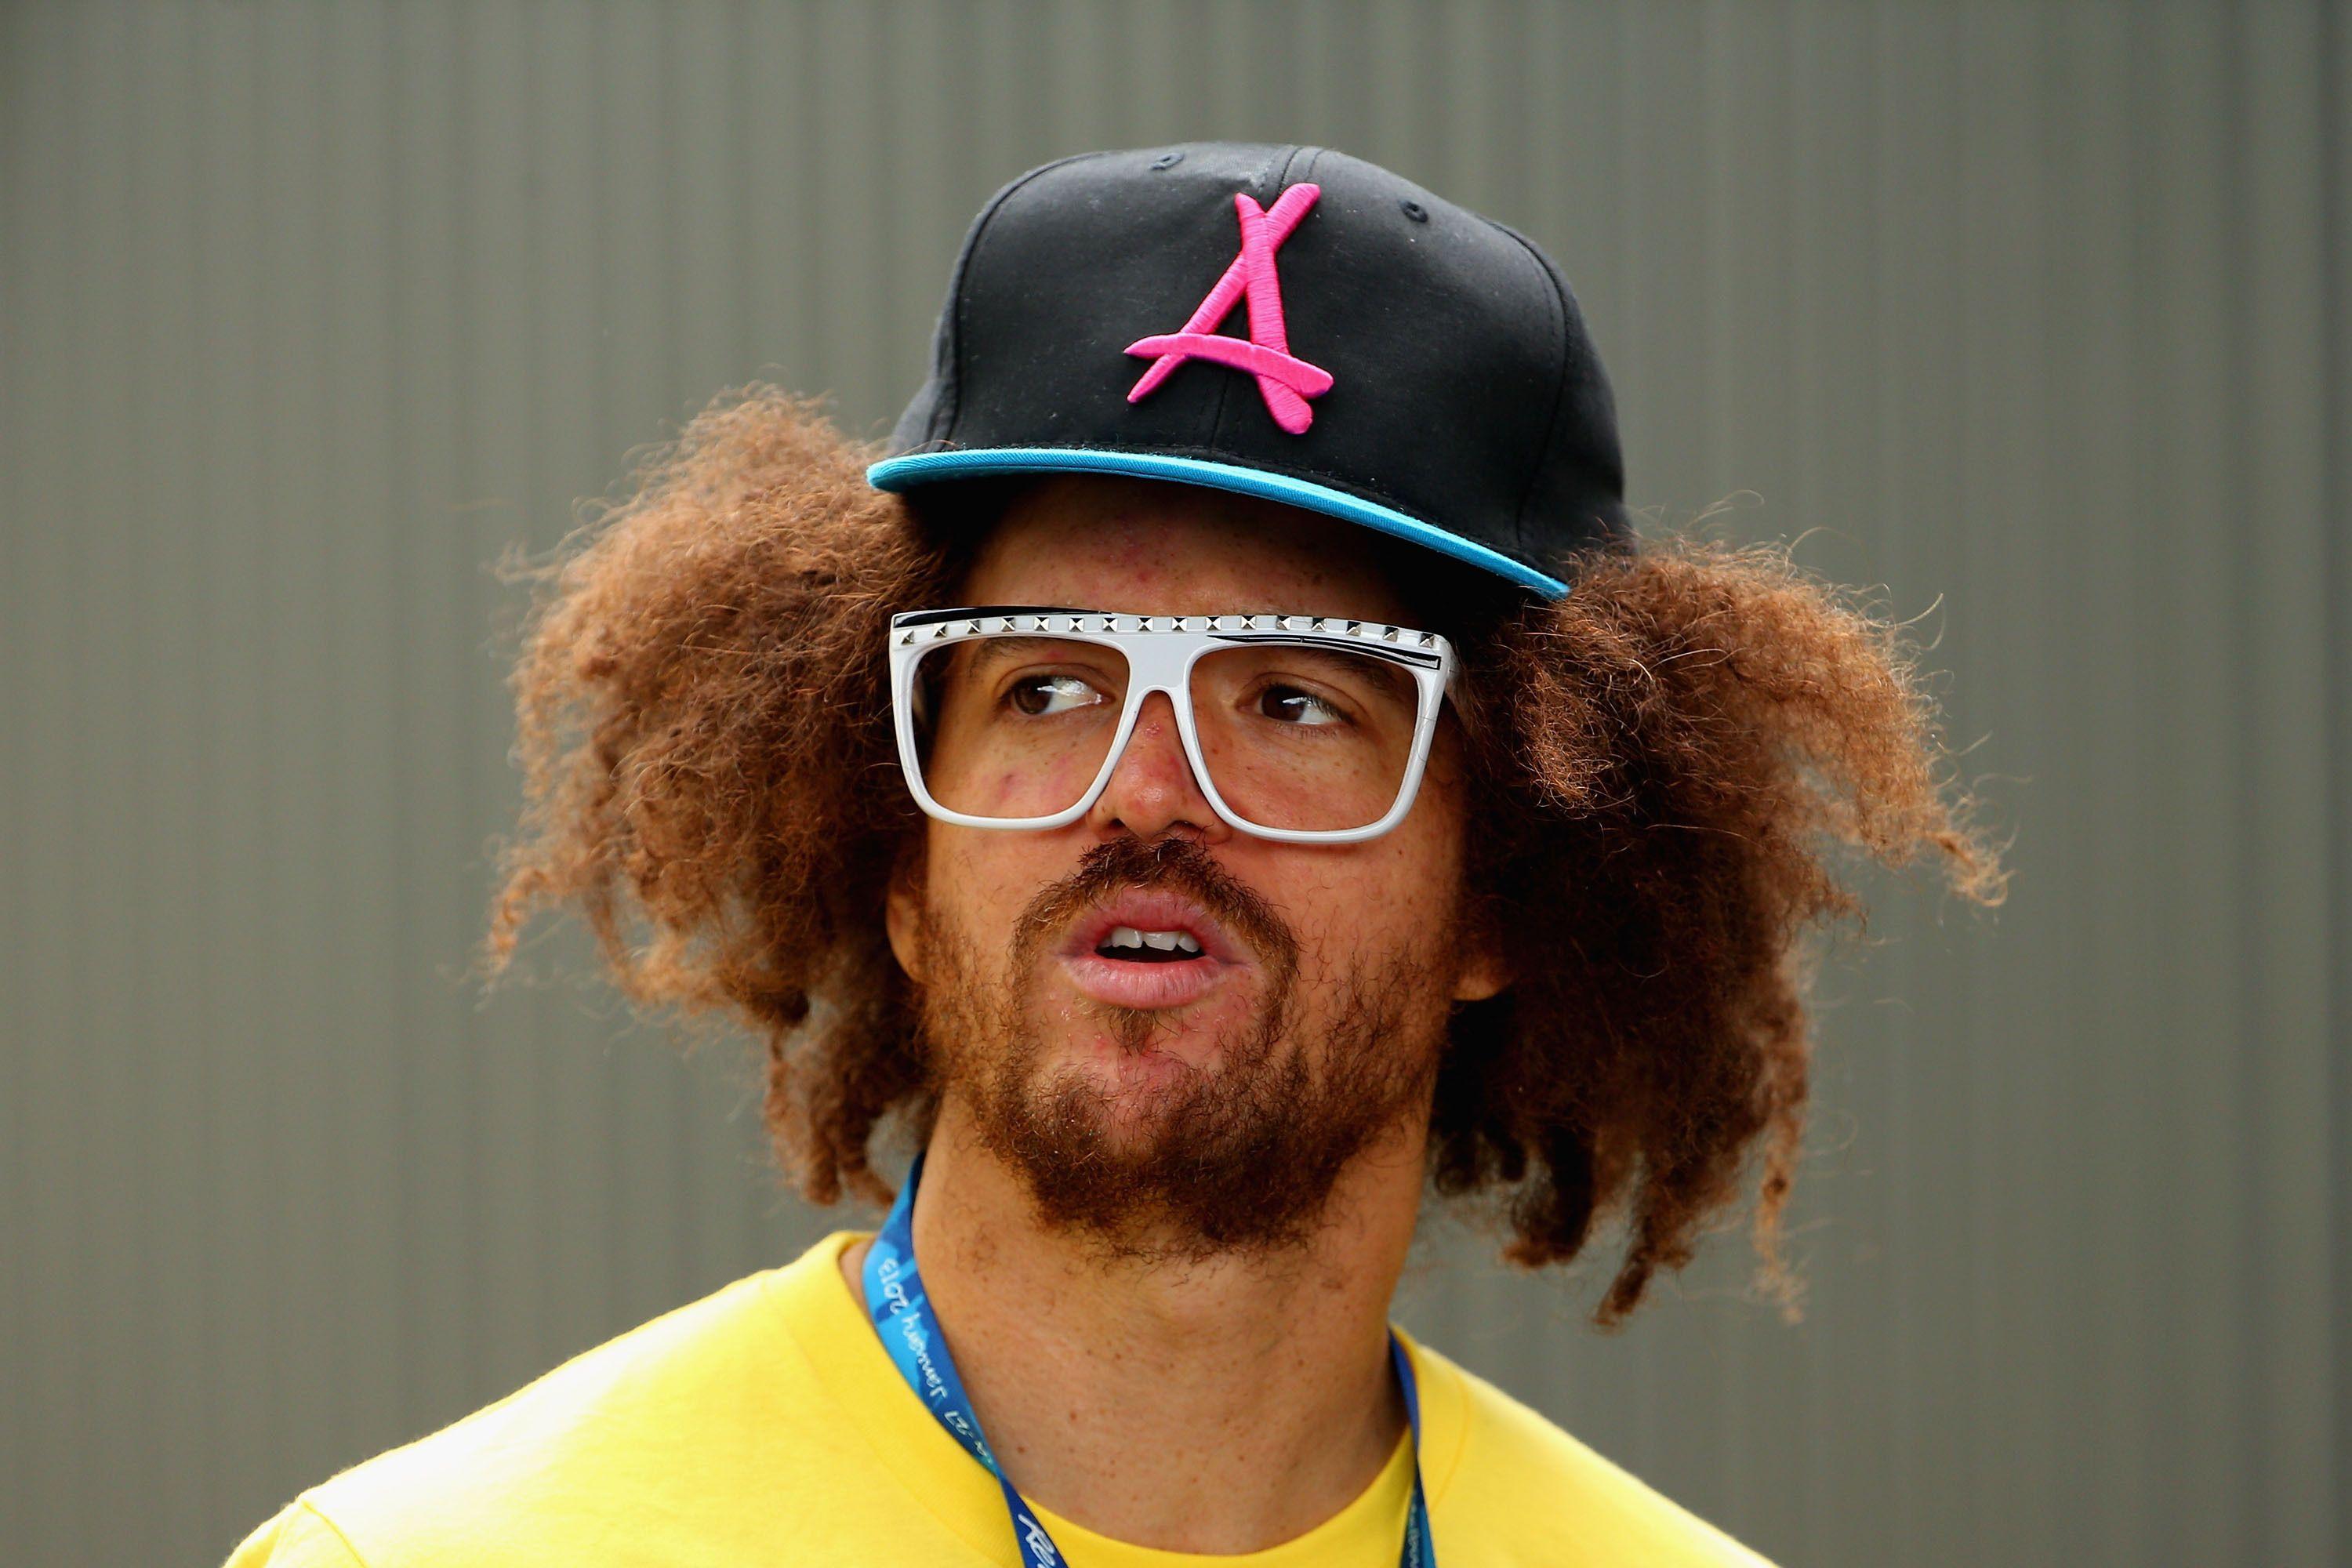 Redfoo Wallpaper Image Photo Picture Background